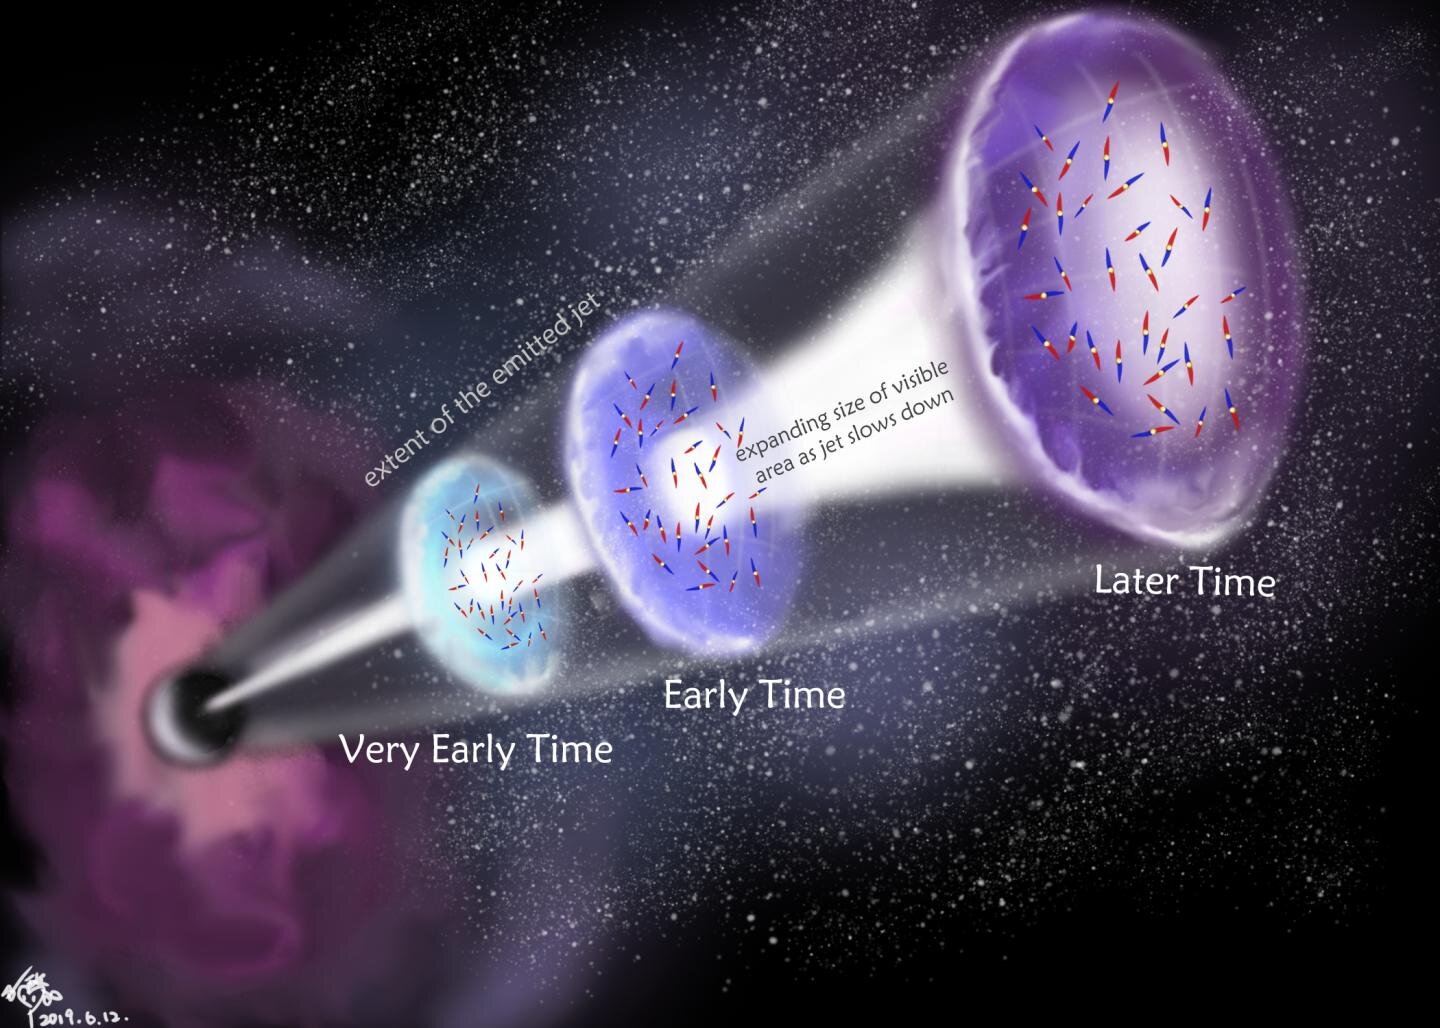 Astronomers make first detection of polarised radio waves in Gamma Ray Burst jets